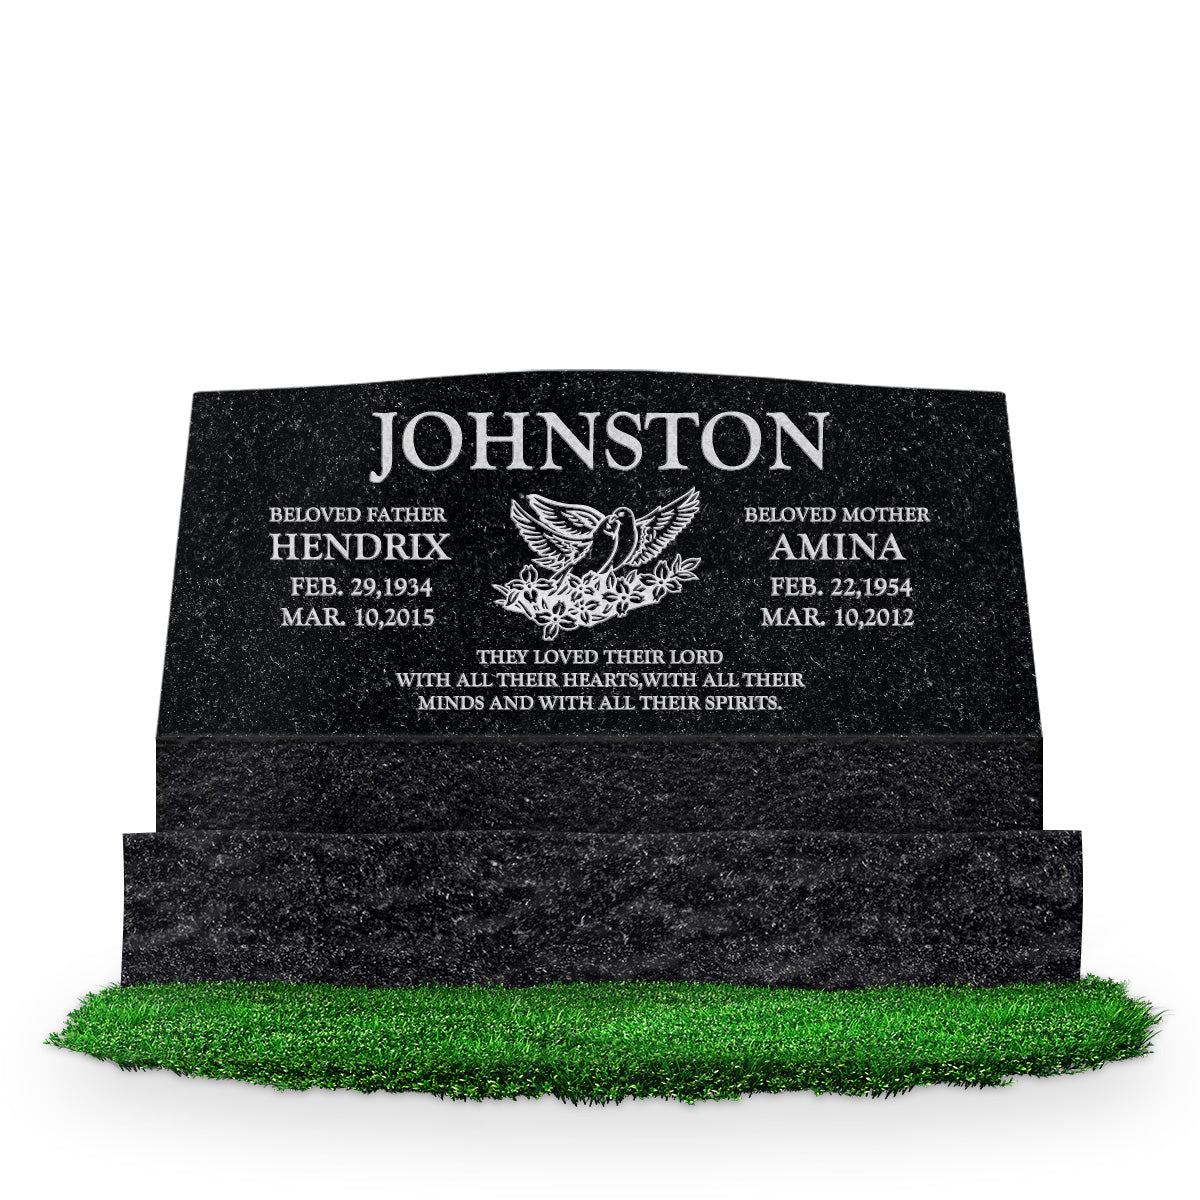 36″ x 10″ x 16″ Serp Top Slant Headstone: polished front and back; 42″ base; Companion/Artwork